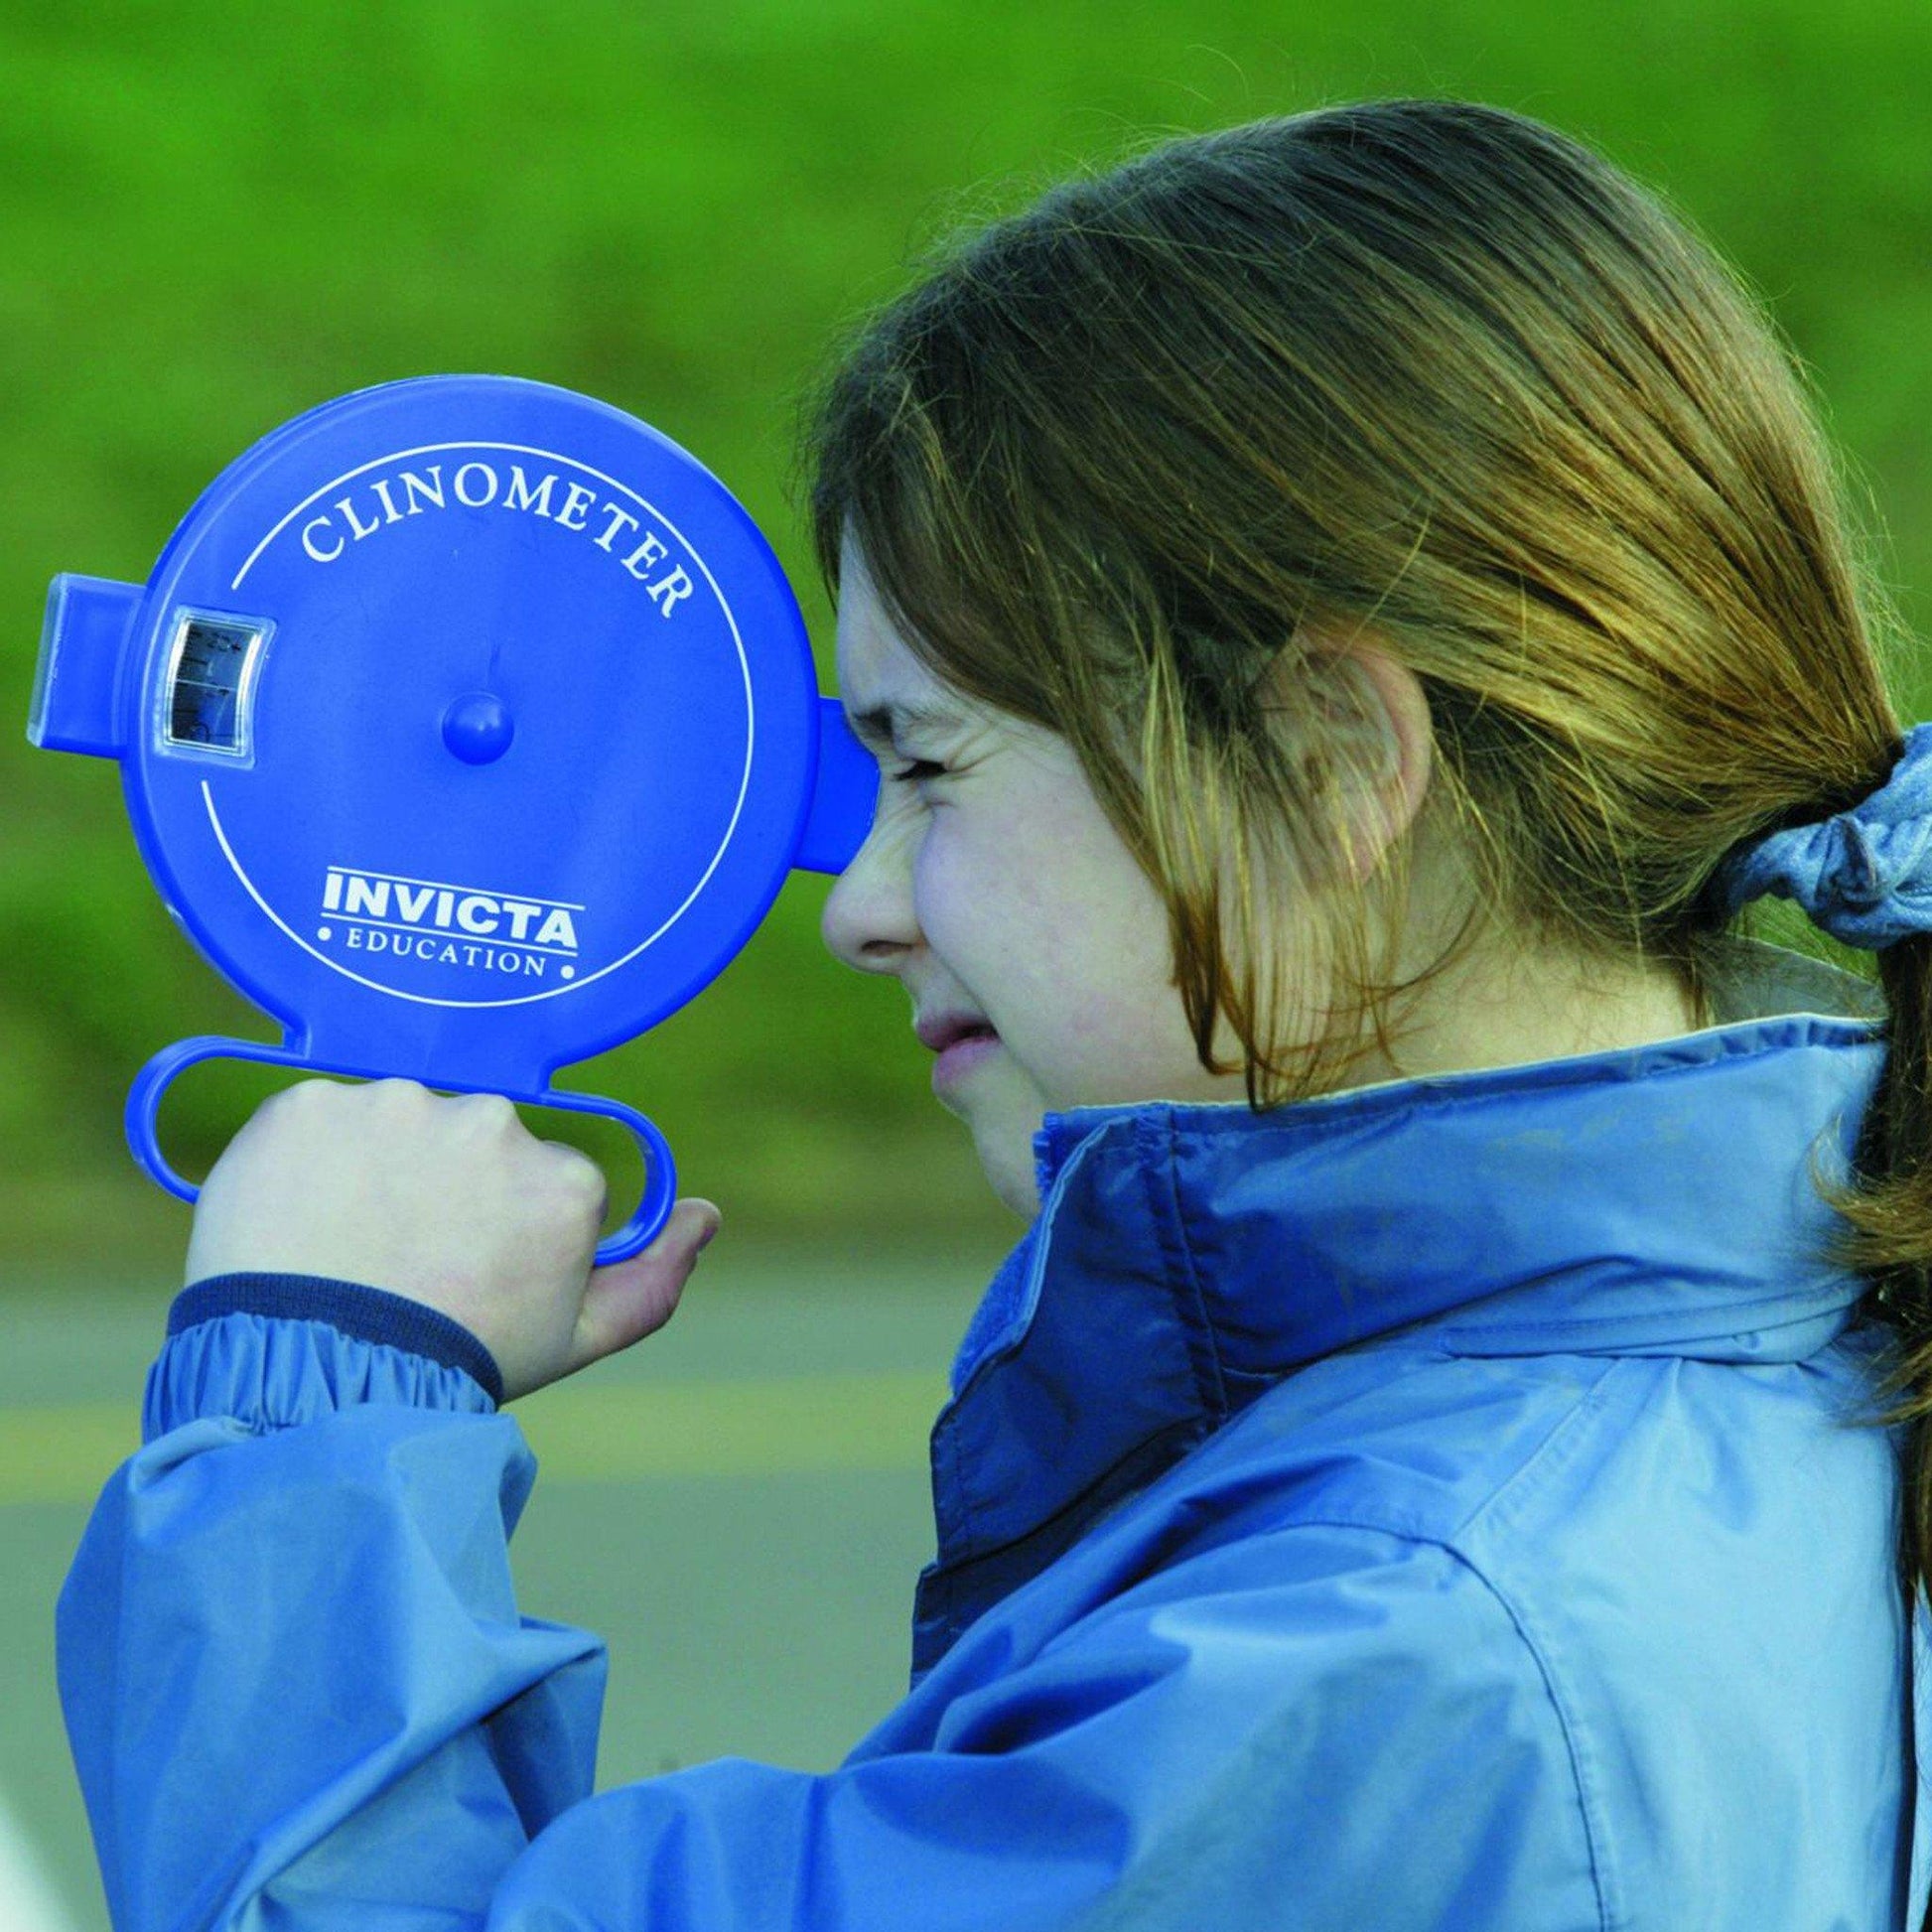 Fieldwork Equipment - Sighting Clinometer - Robust And Compact